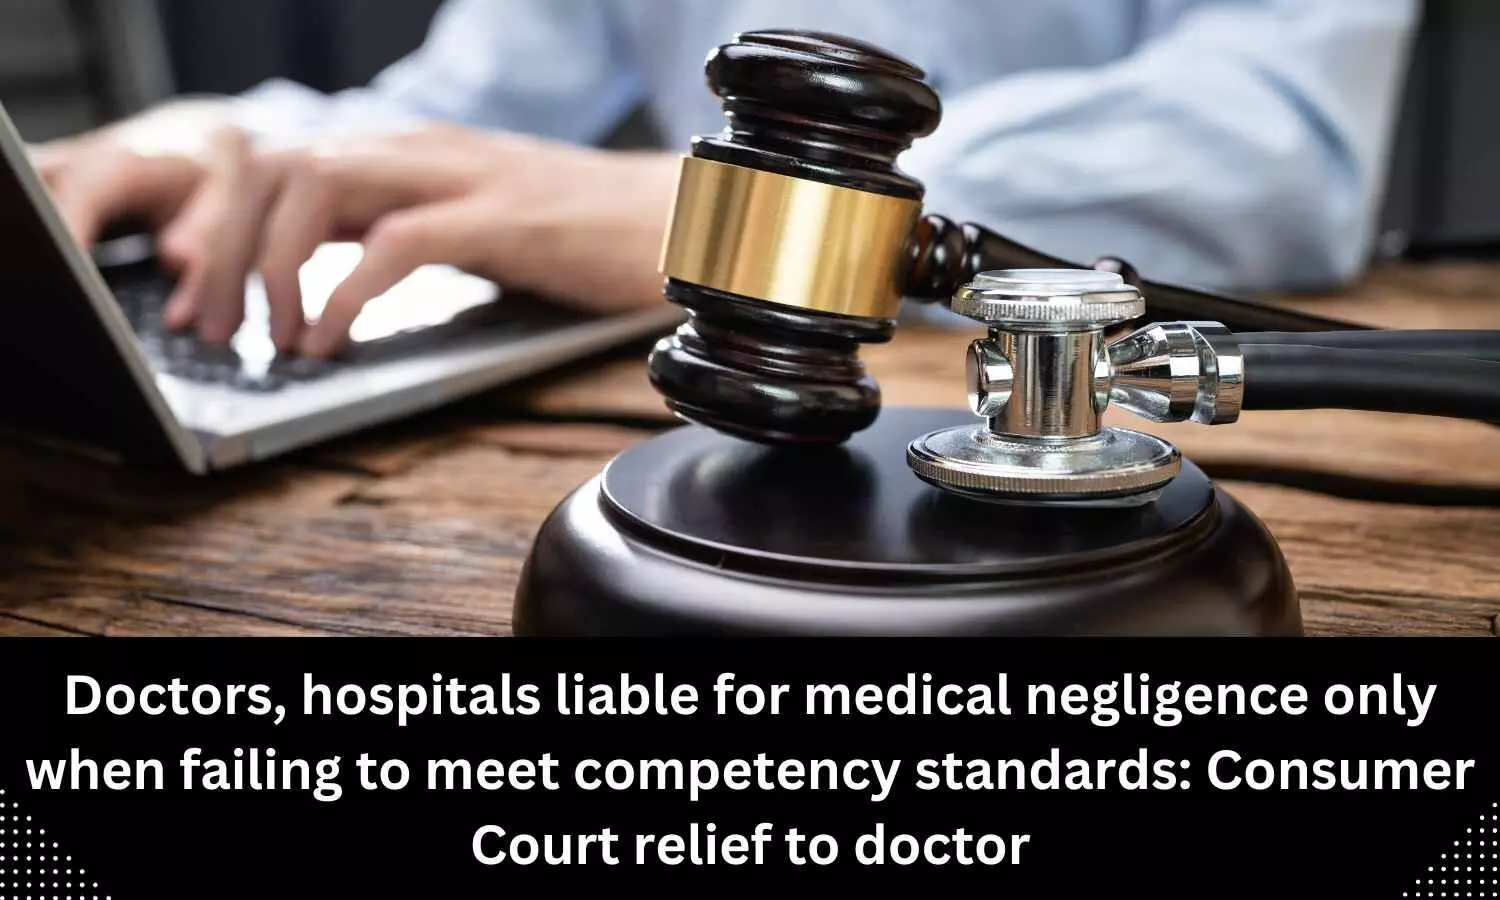 Hospitals, doctors liable for medical negligence only when failing to meet competency standards: Consumer Court relief to doctor